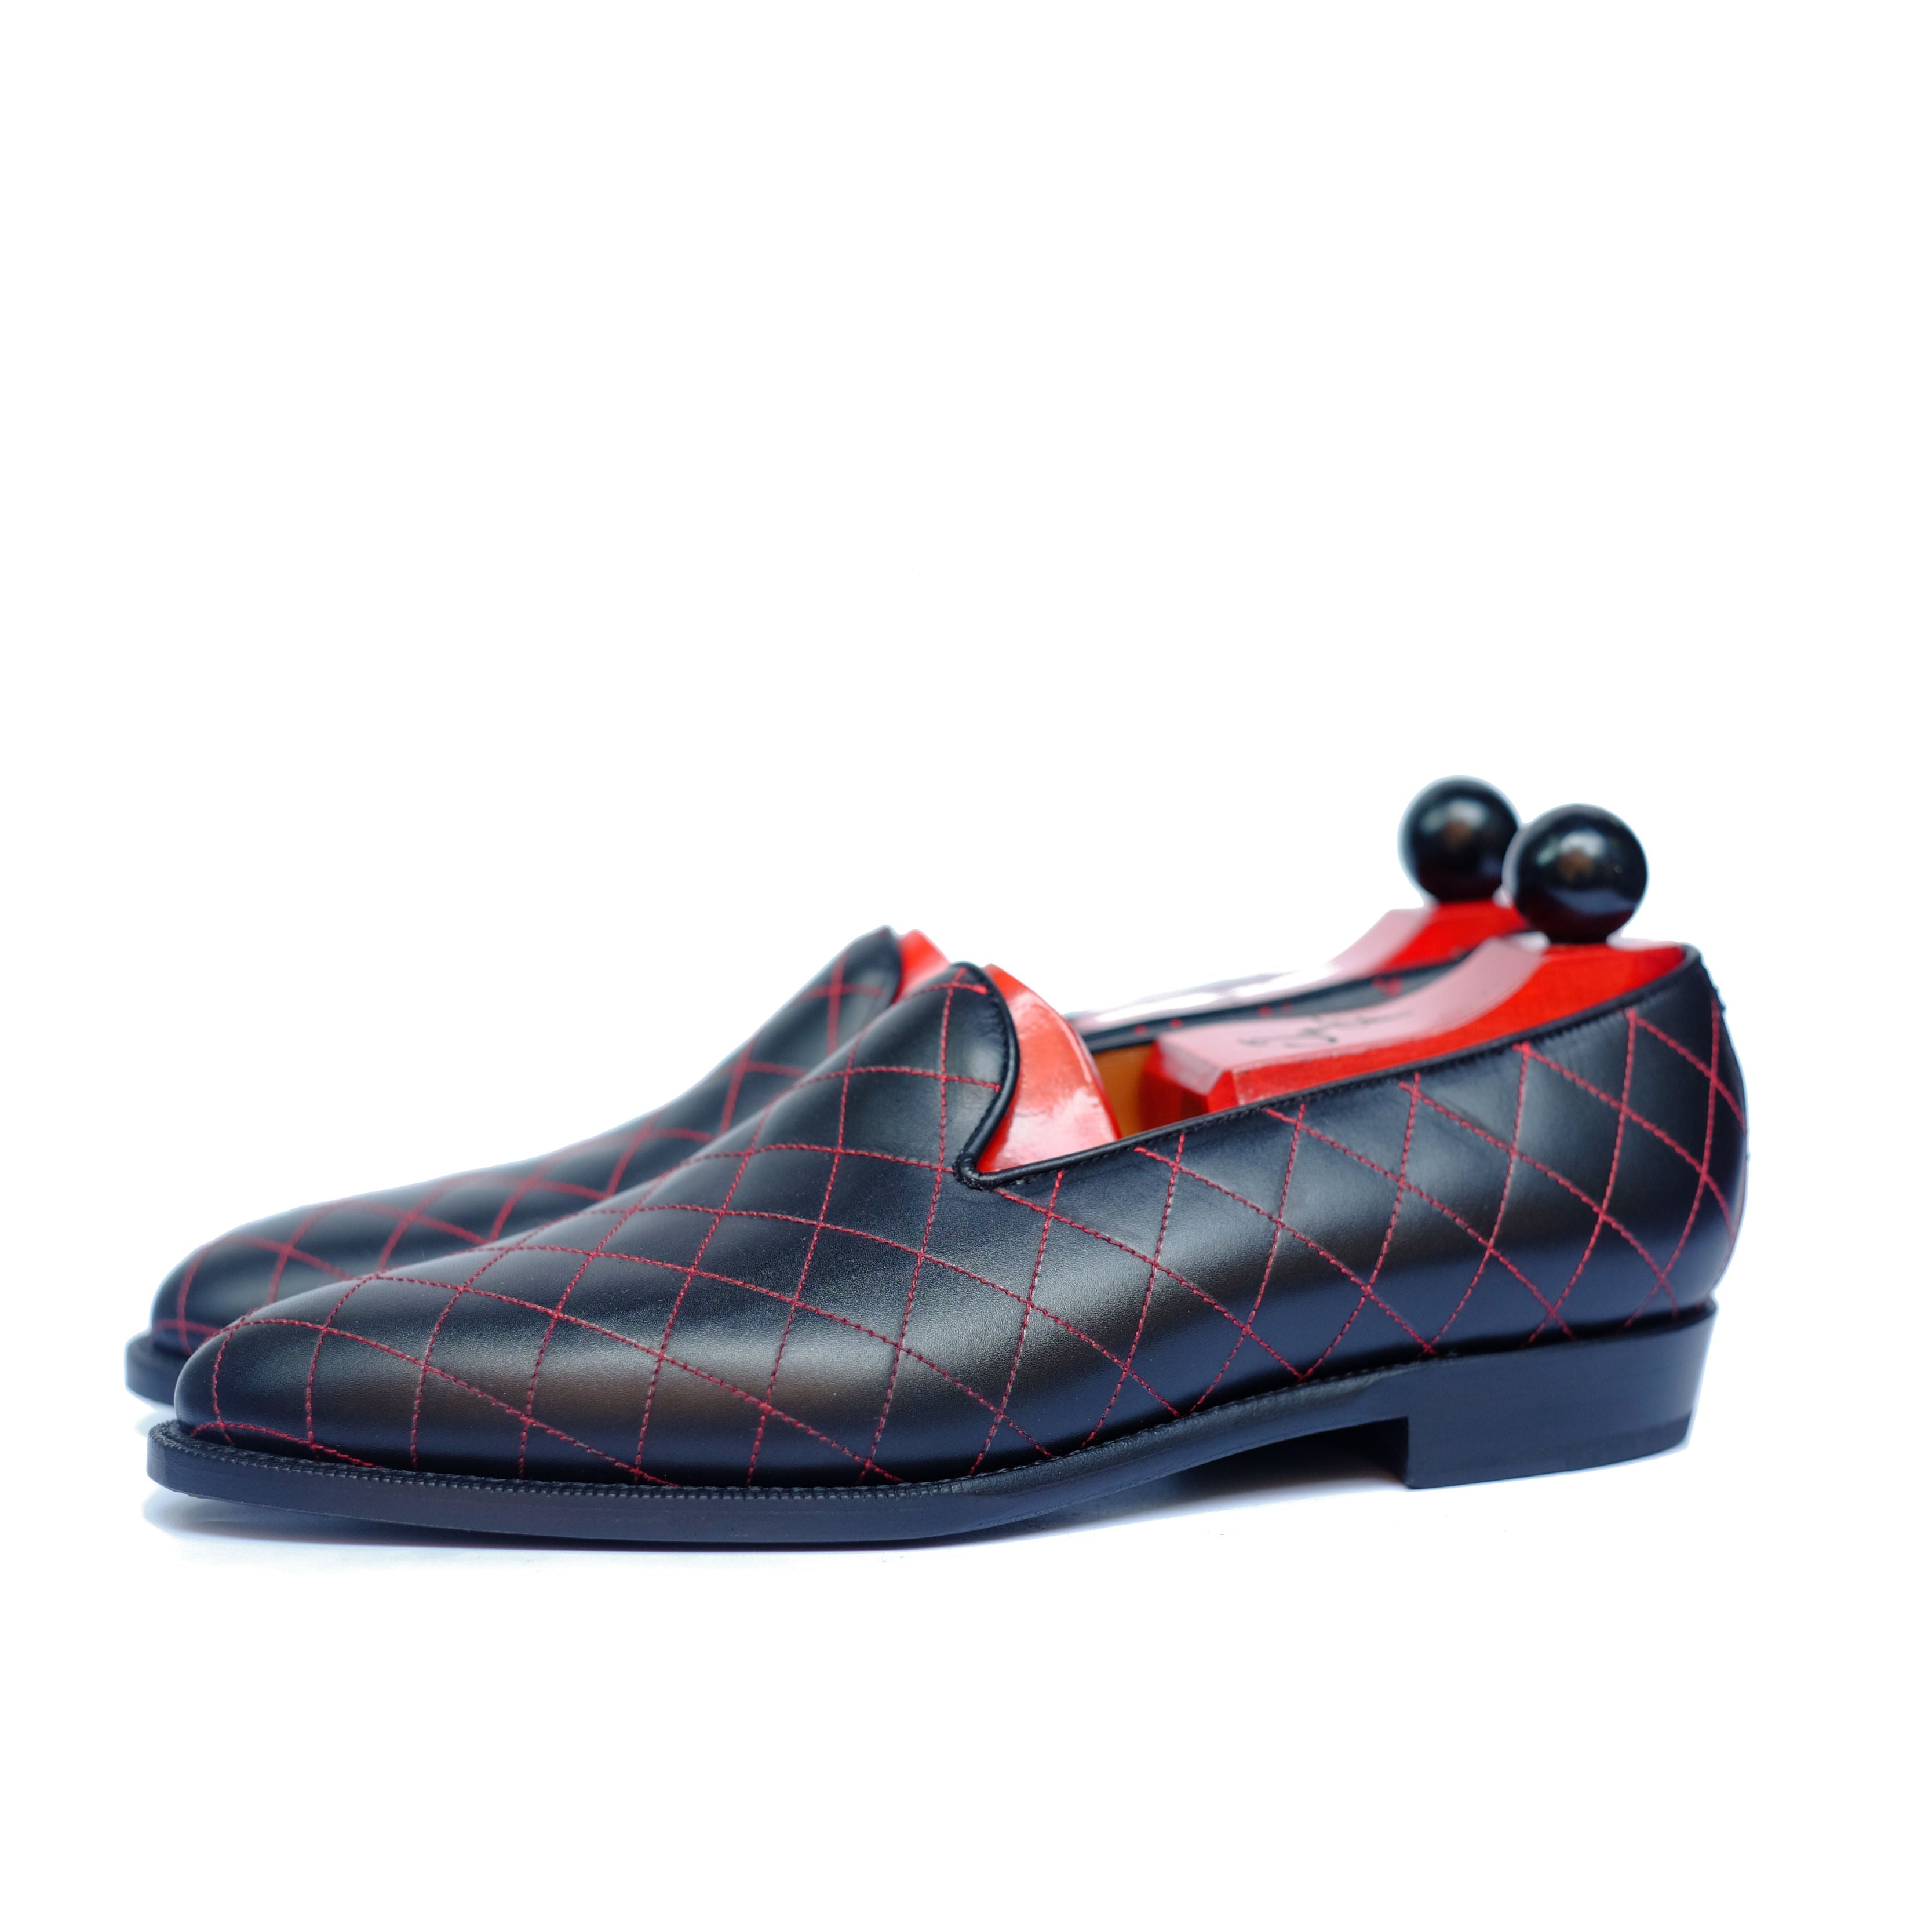 Laurelhurst II - MTO - Quilted Black Calf / Red Stitching - TMG Last - Single Leather Sole